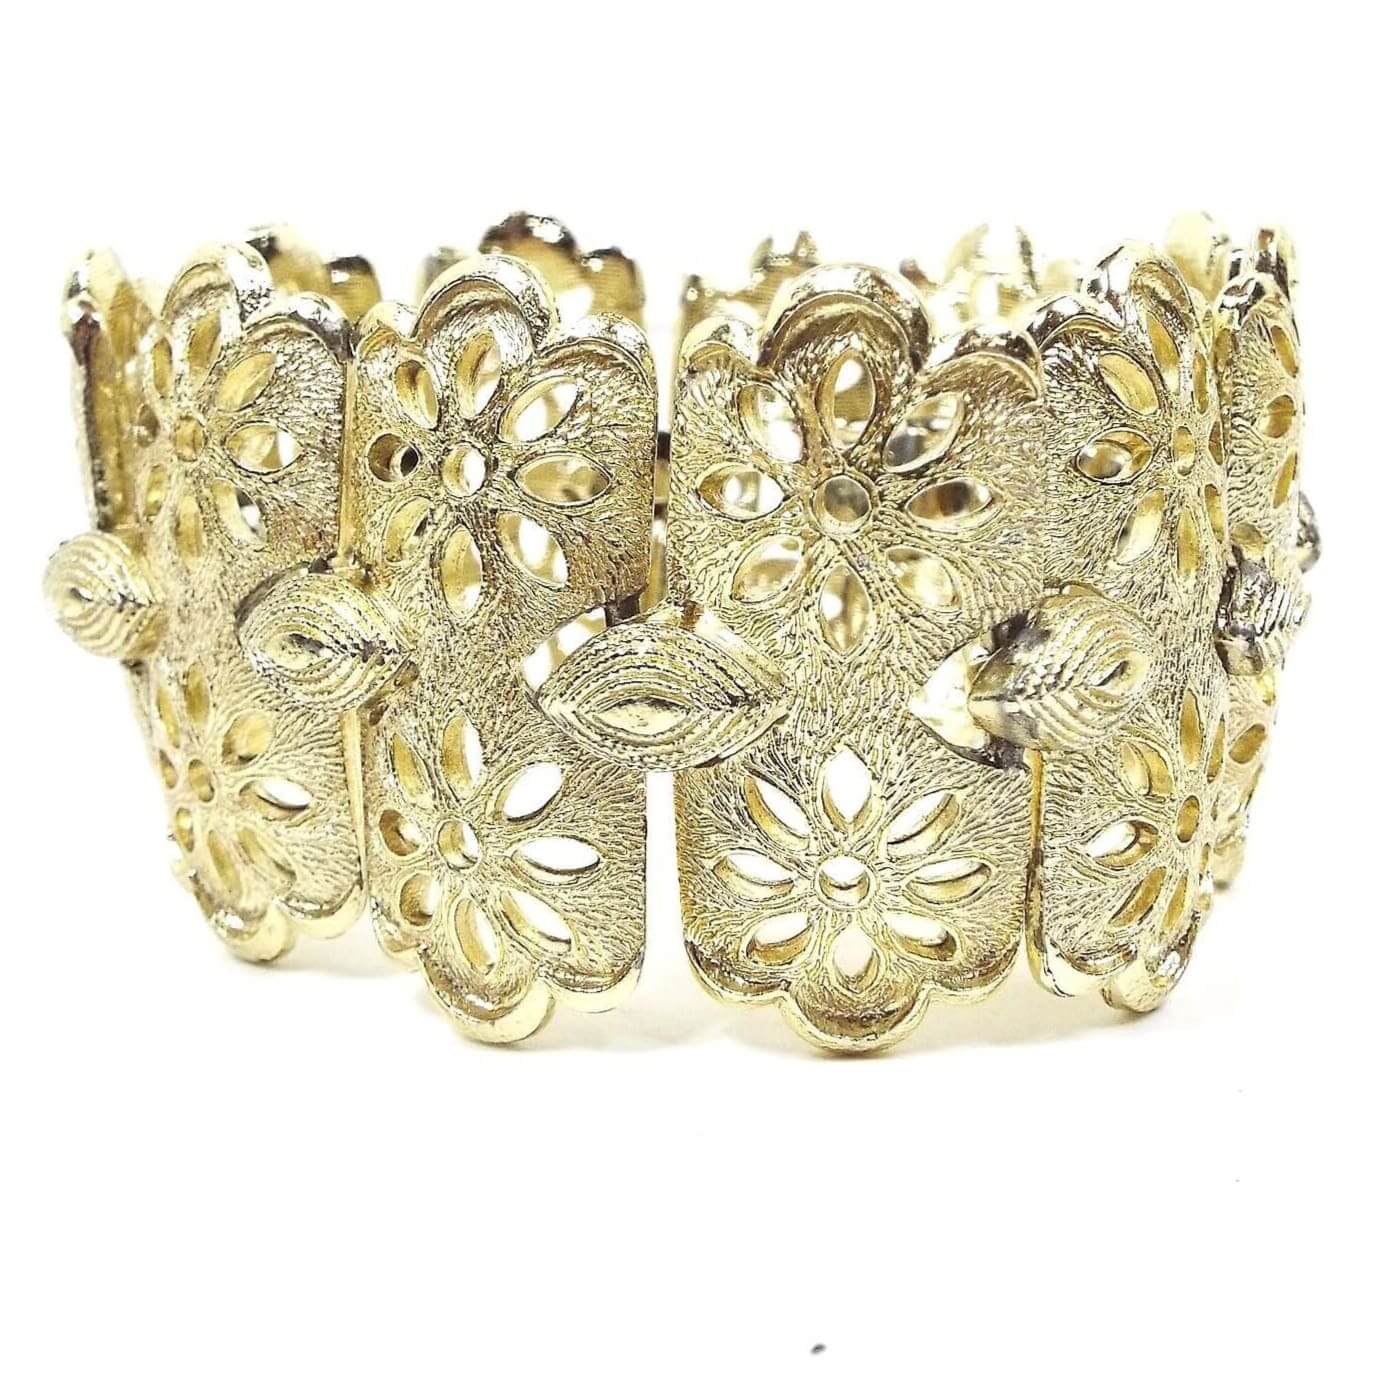 Side view of the top of the Coro Pegasus filigree flower panel bracelet. It is gold tone in color with wide links. Each link has two side by side flower designs with cut out areas for the petals. 